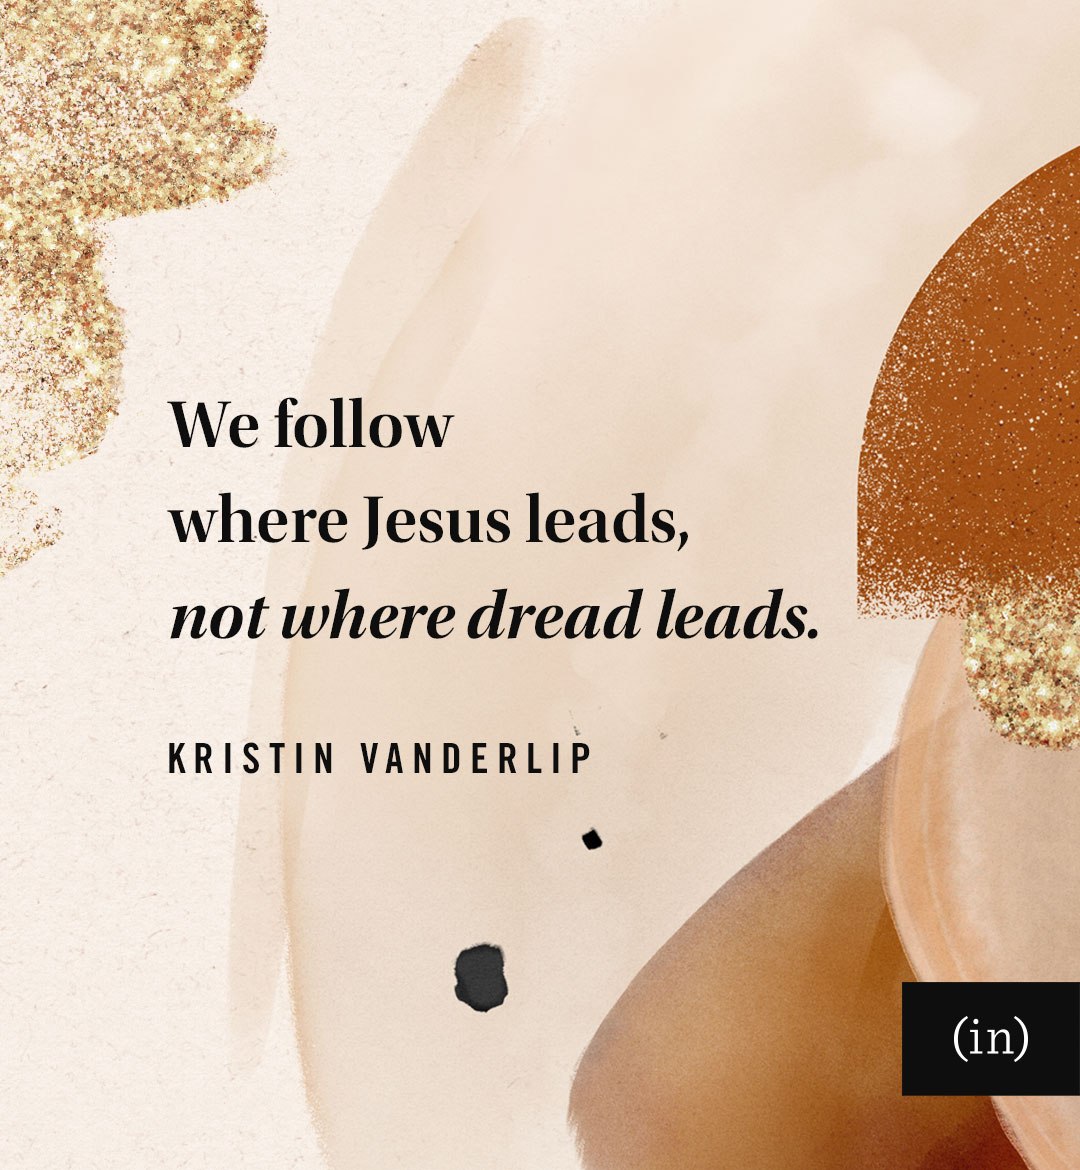 We follow where Jesus leads, not where dread leads. -Sheila Atchley